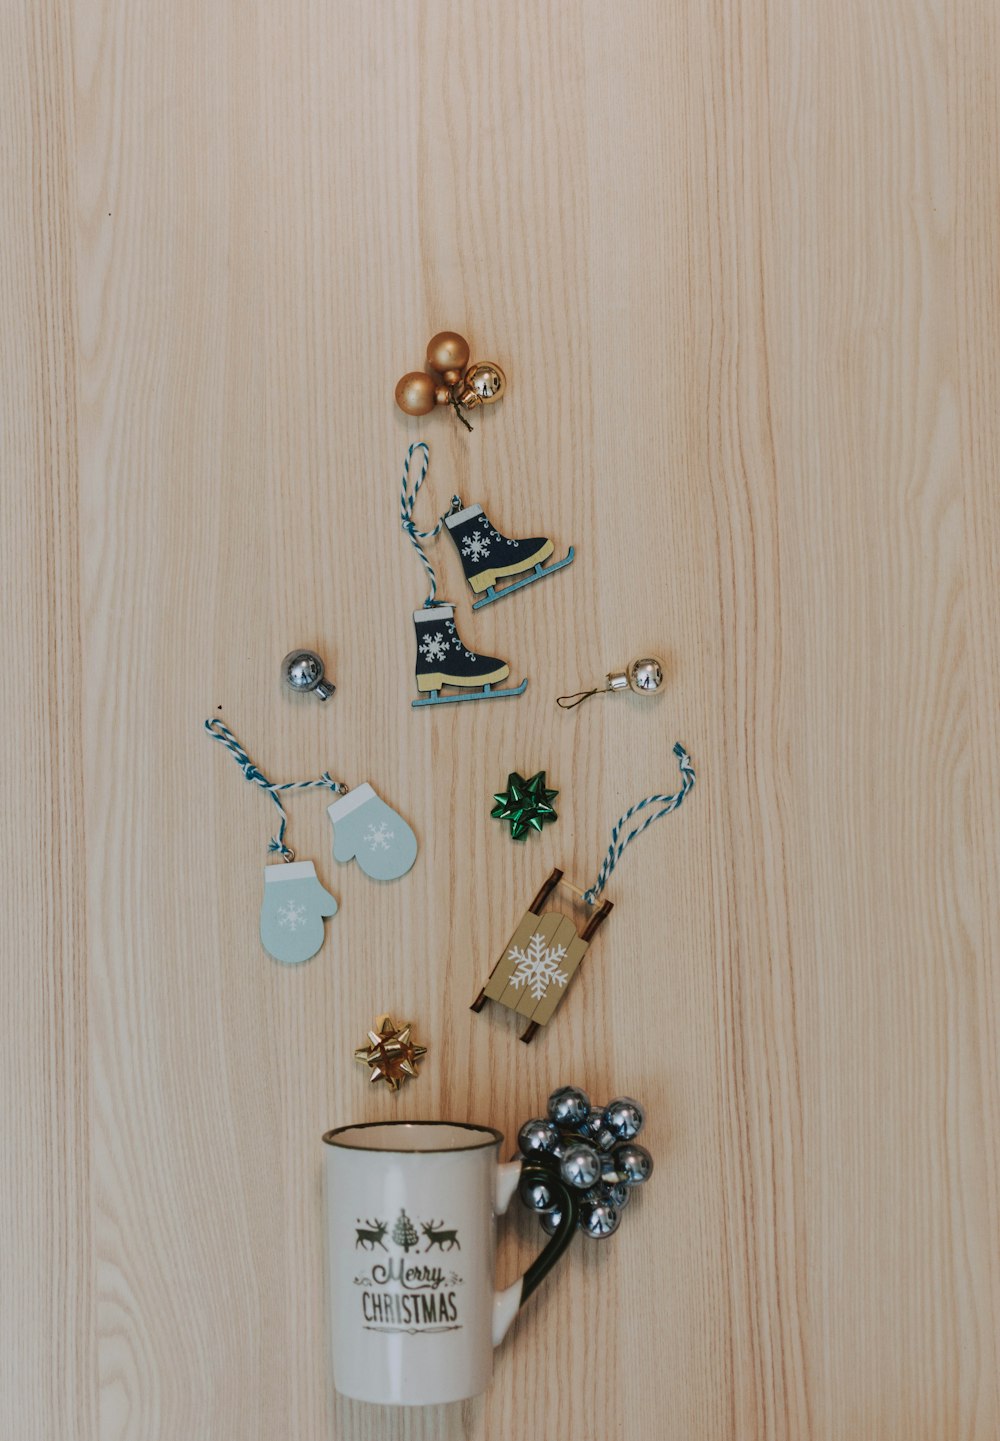 white and black printed mug near silver bauble, blue mittens, ice skates, and gold bauble hanging decors